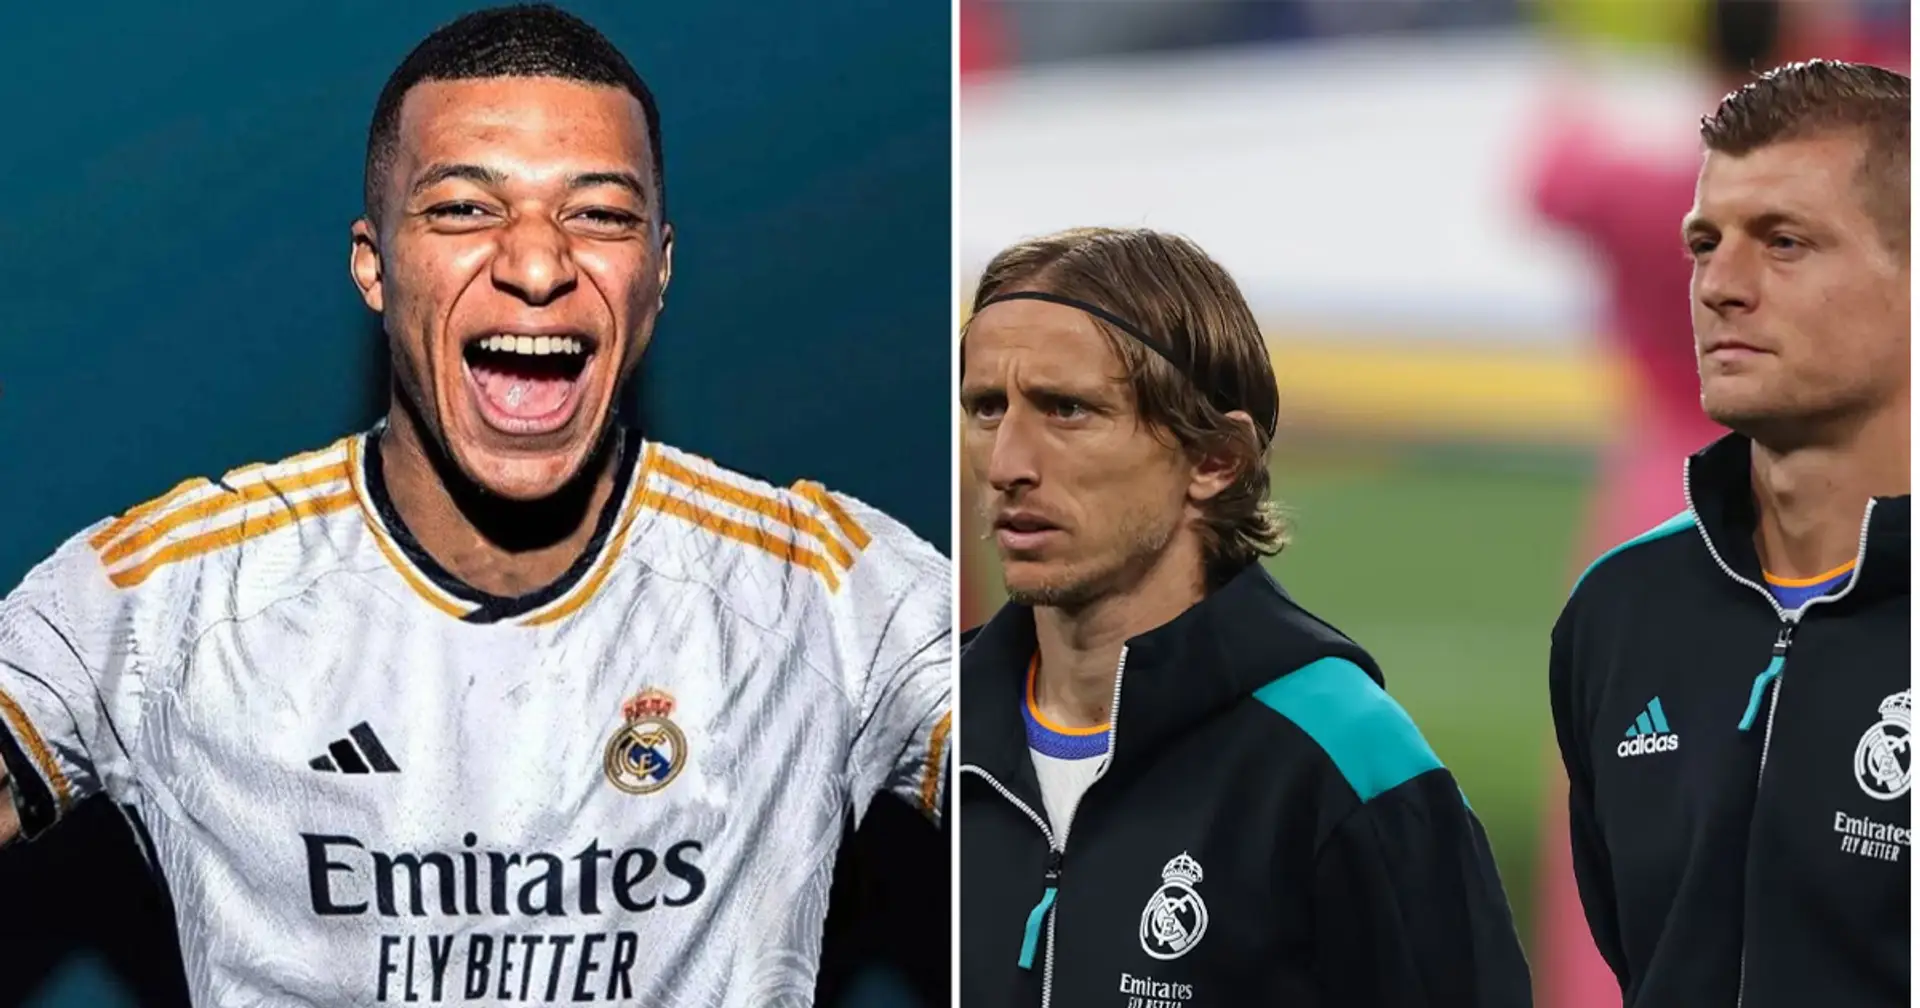 Breaking NEWS: Mbappe to become Real Madrid's highest paid player